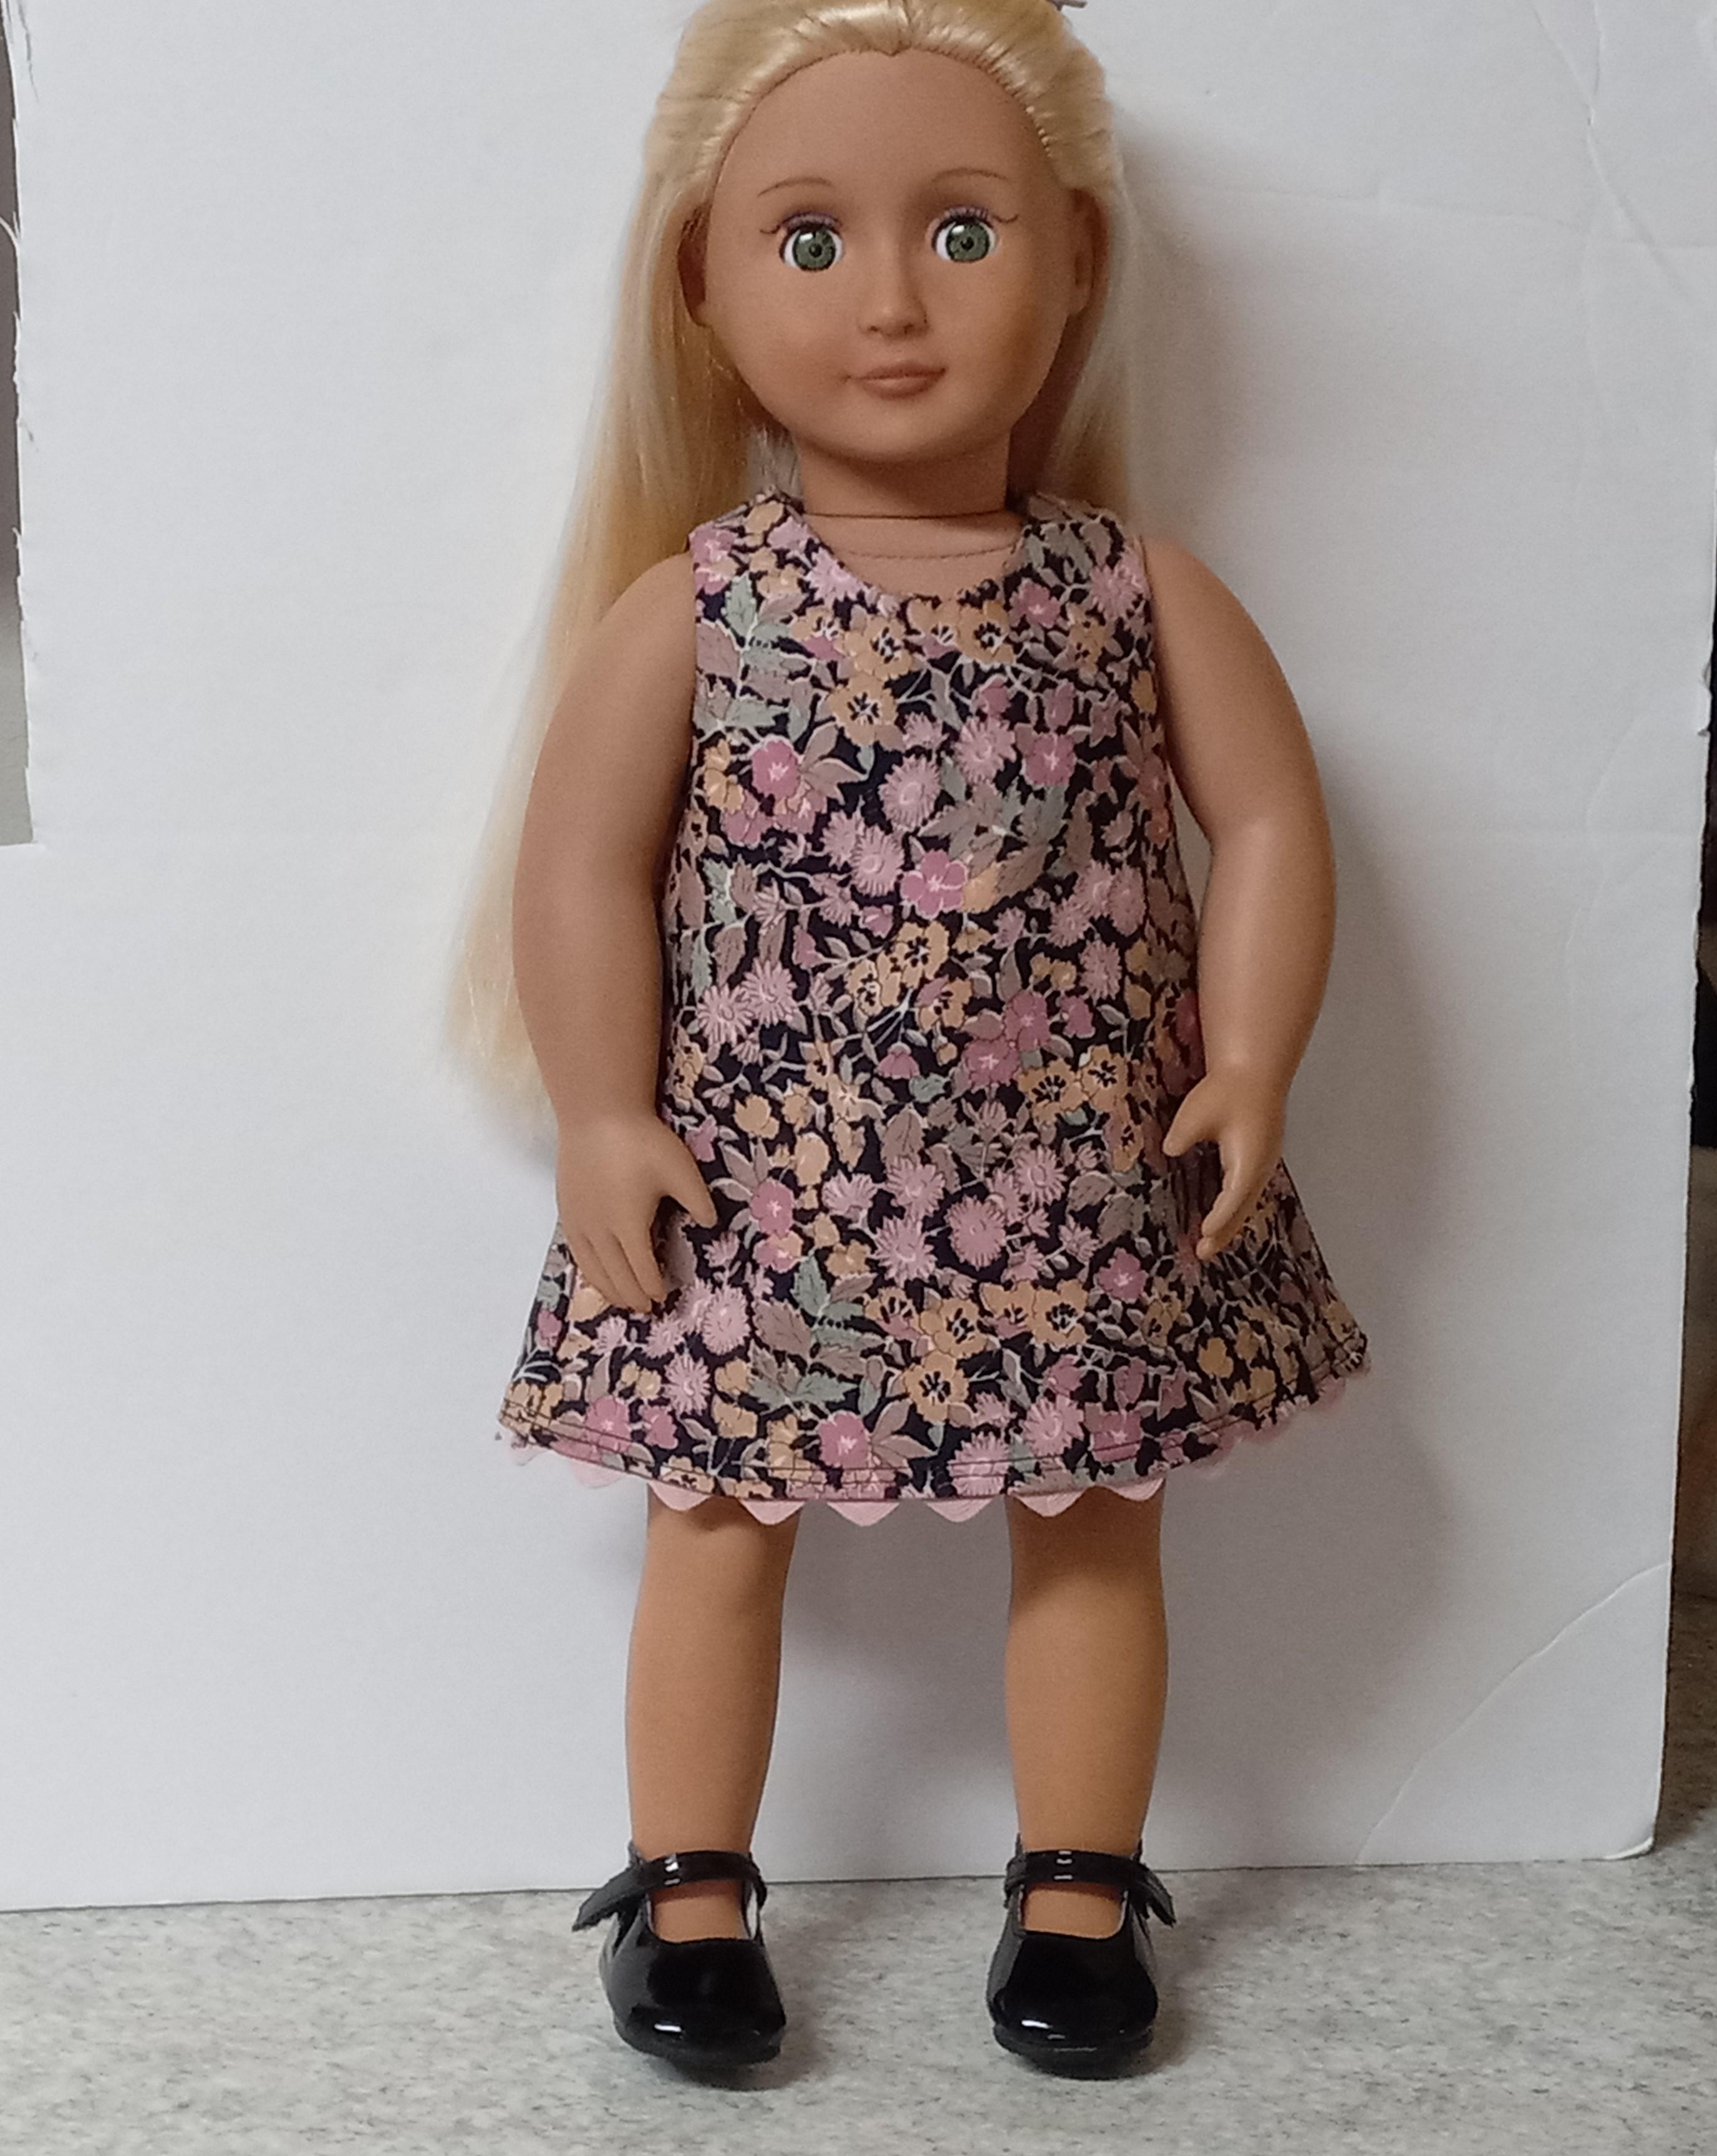 Print A-line doll dress for the Doll Project